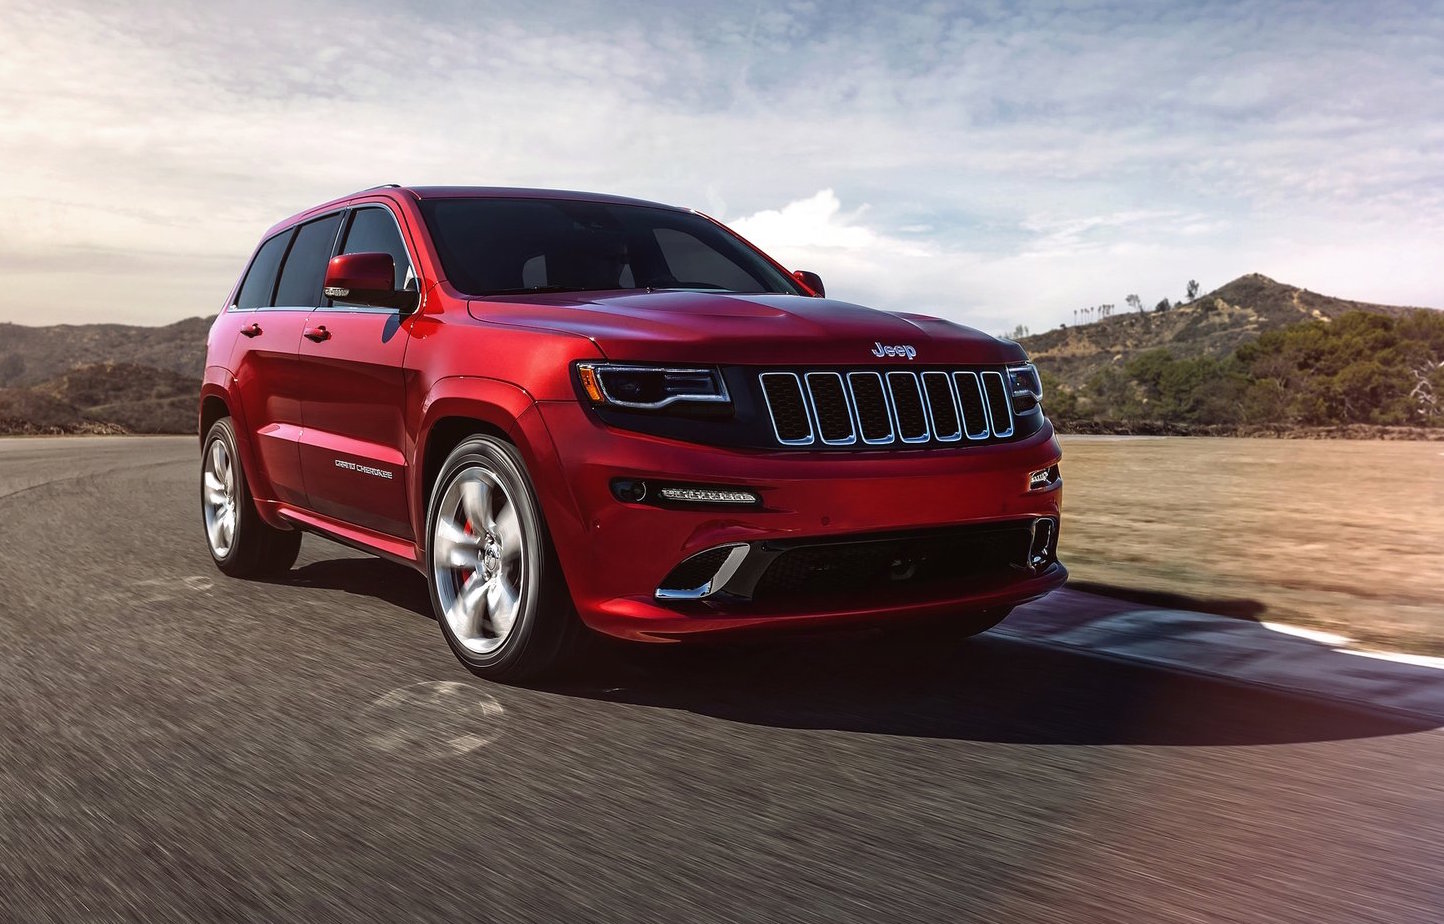 Jeep Grand Cherokee Hellcat confirmed for New York show